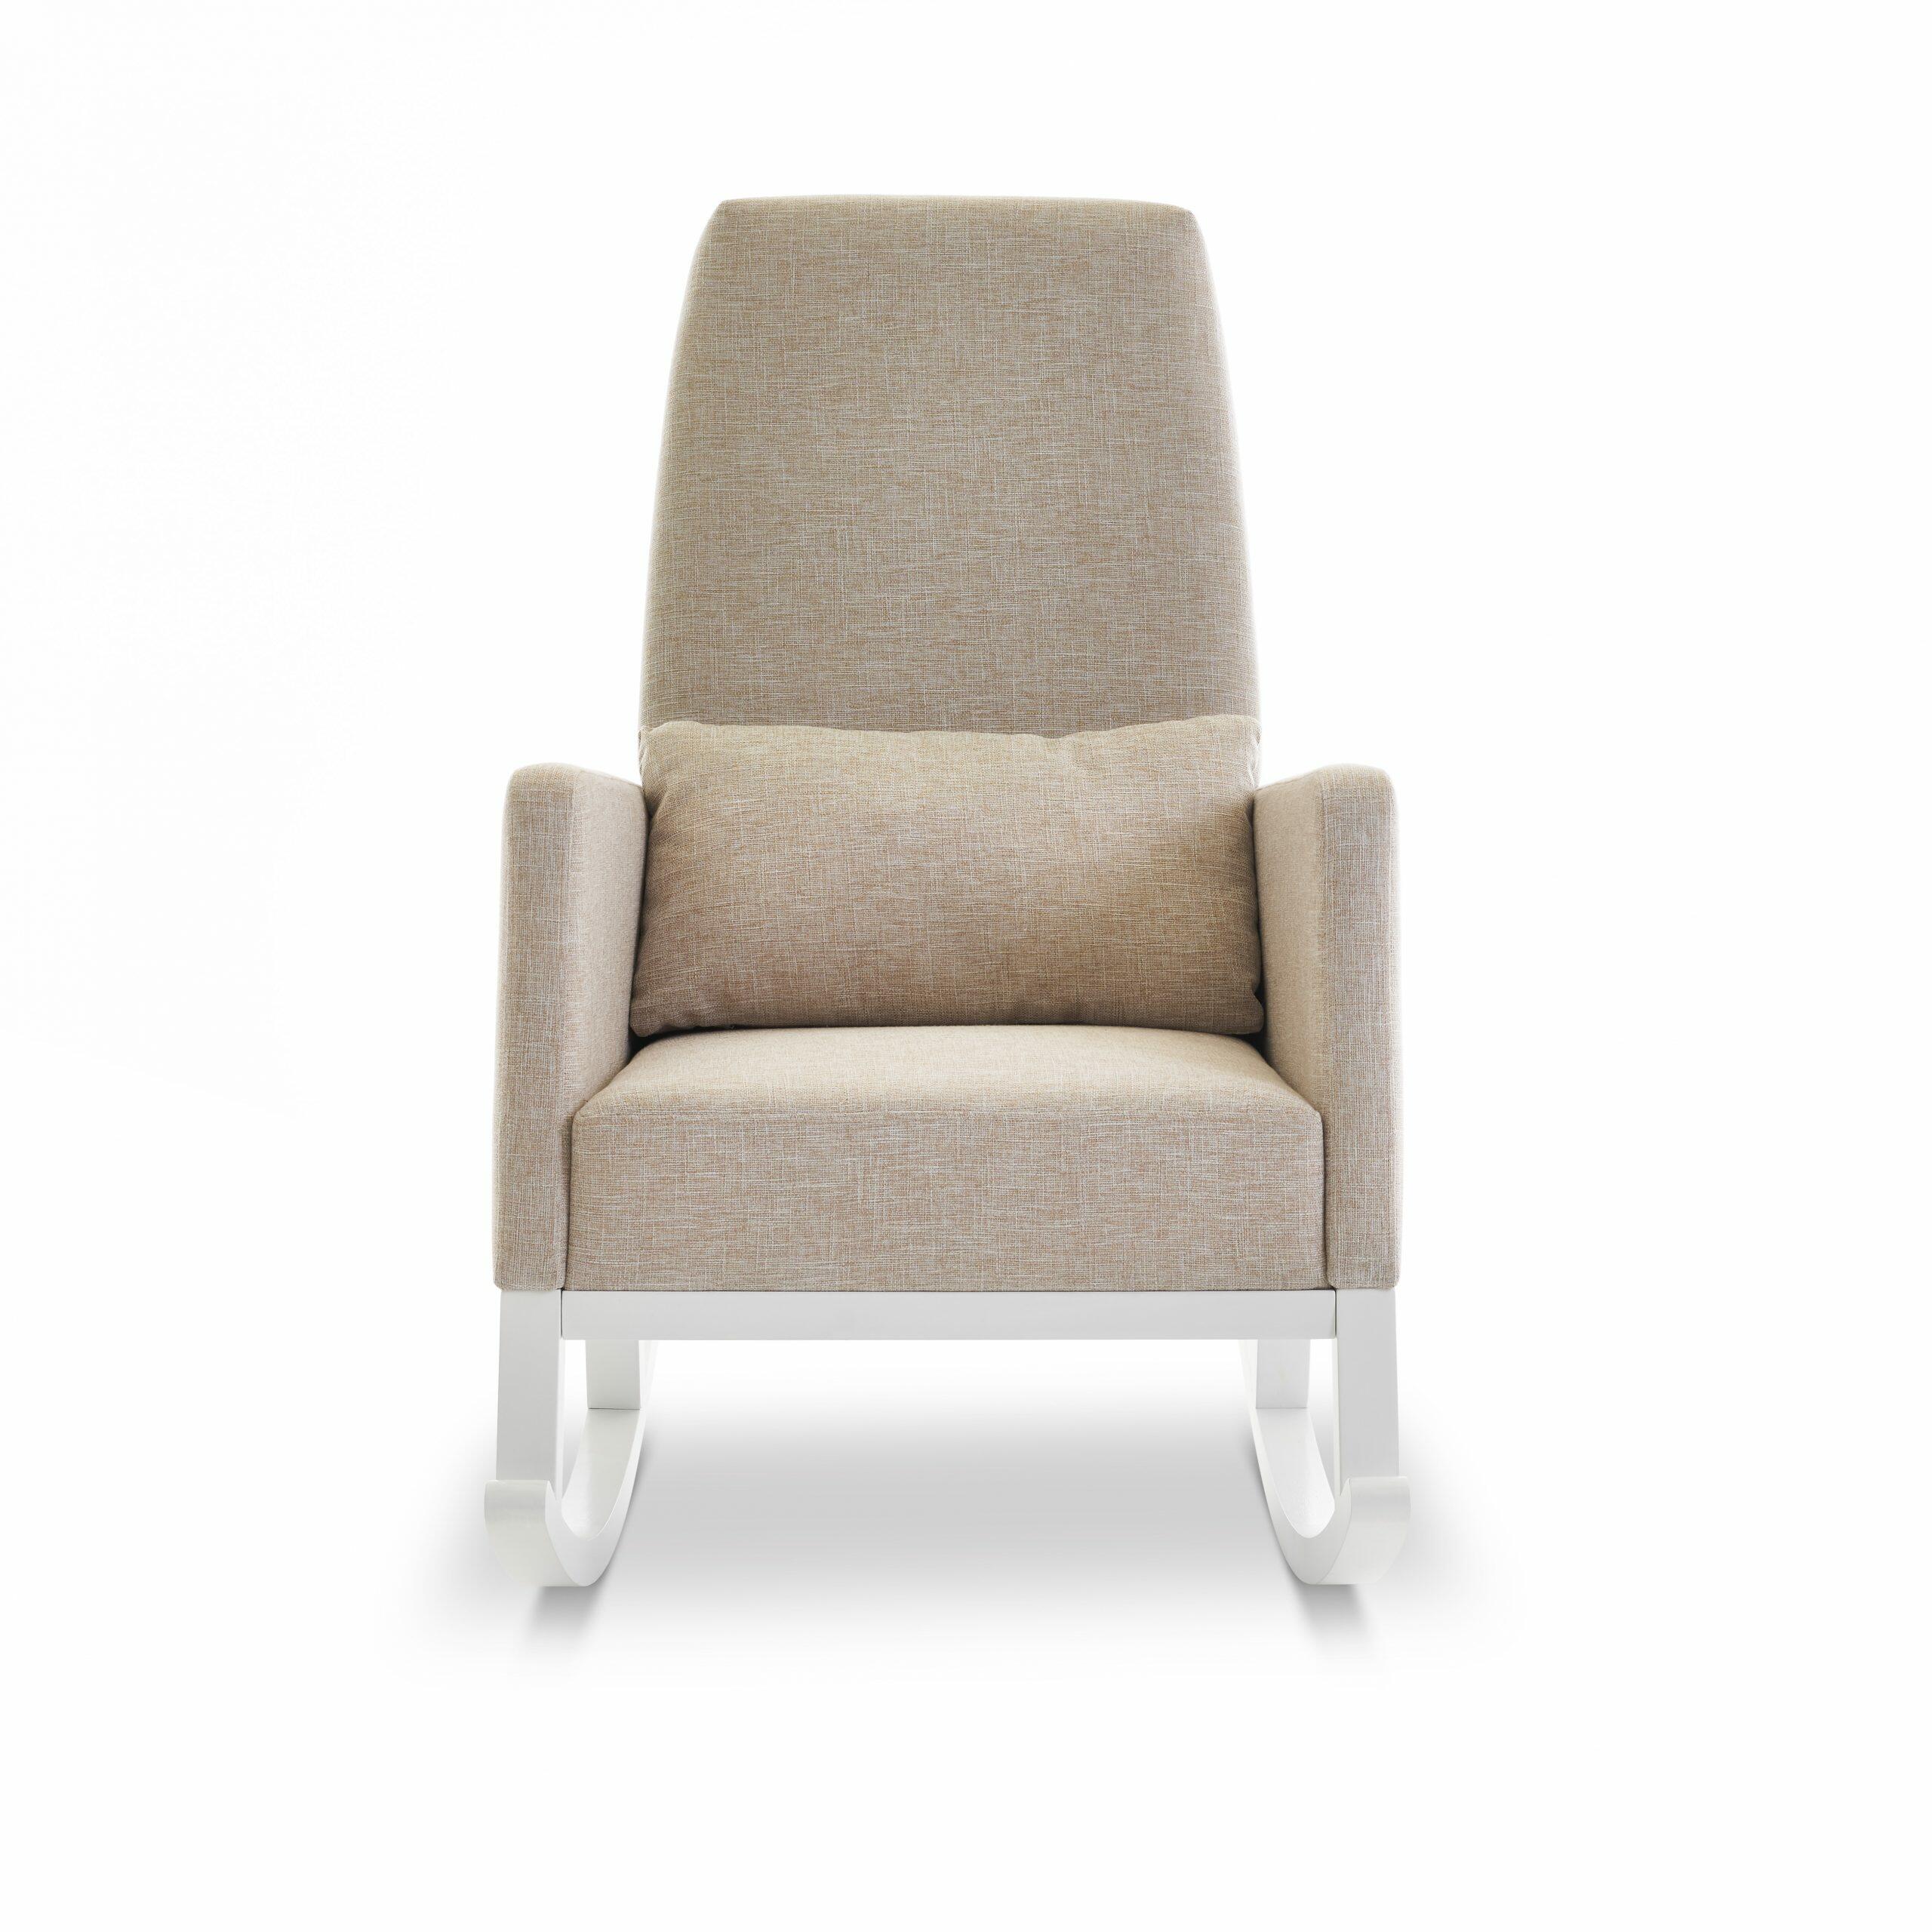 OBaby High Back rocking Nursery Chair in Oatmeal